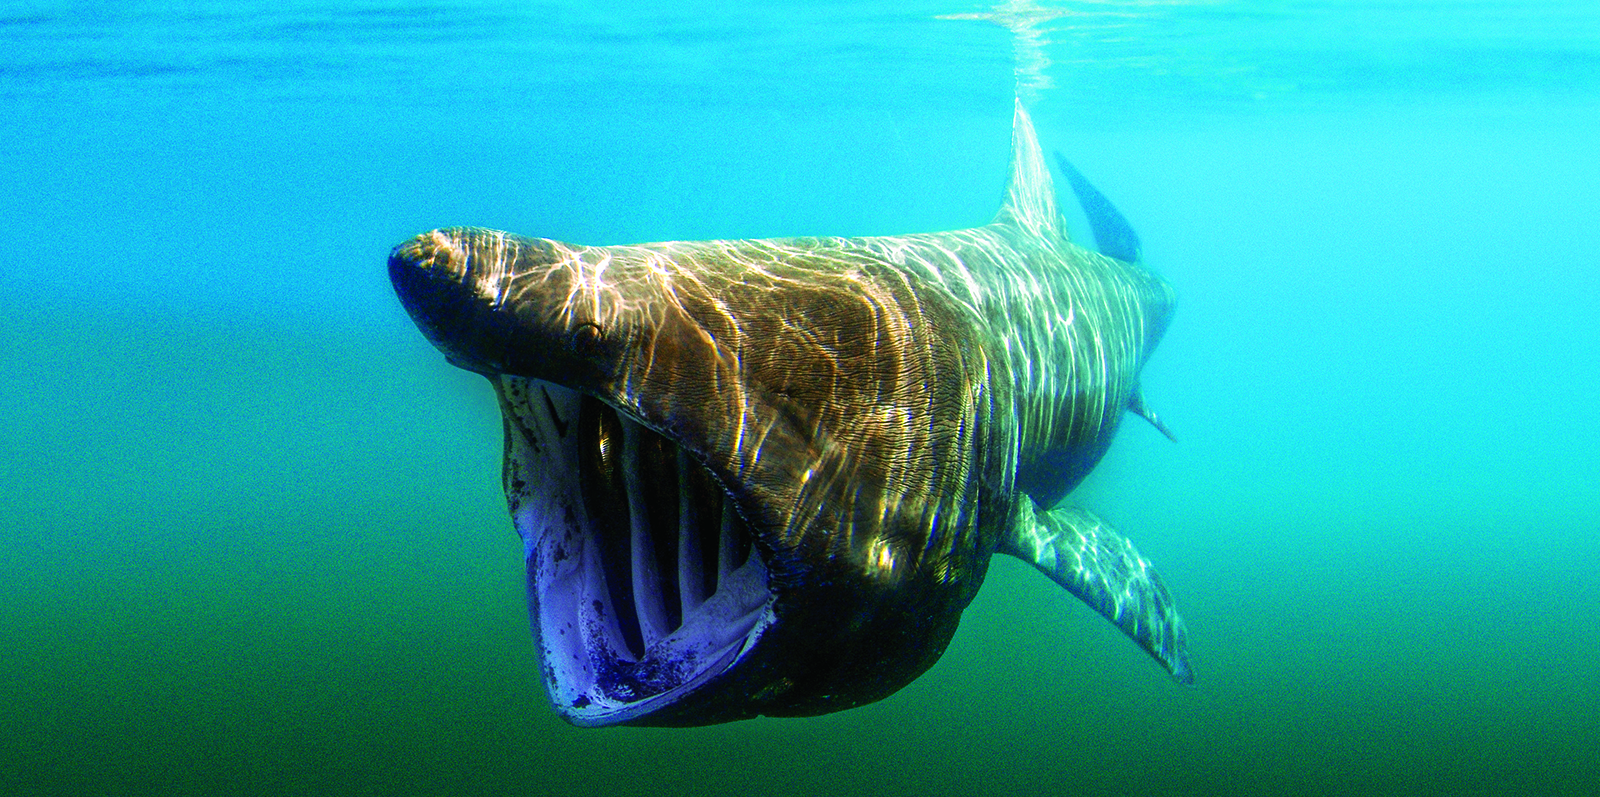 A basking shark swims with its mouth open